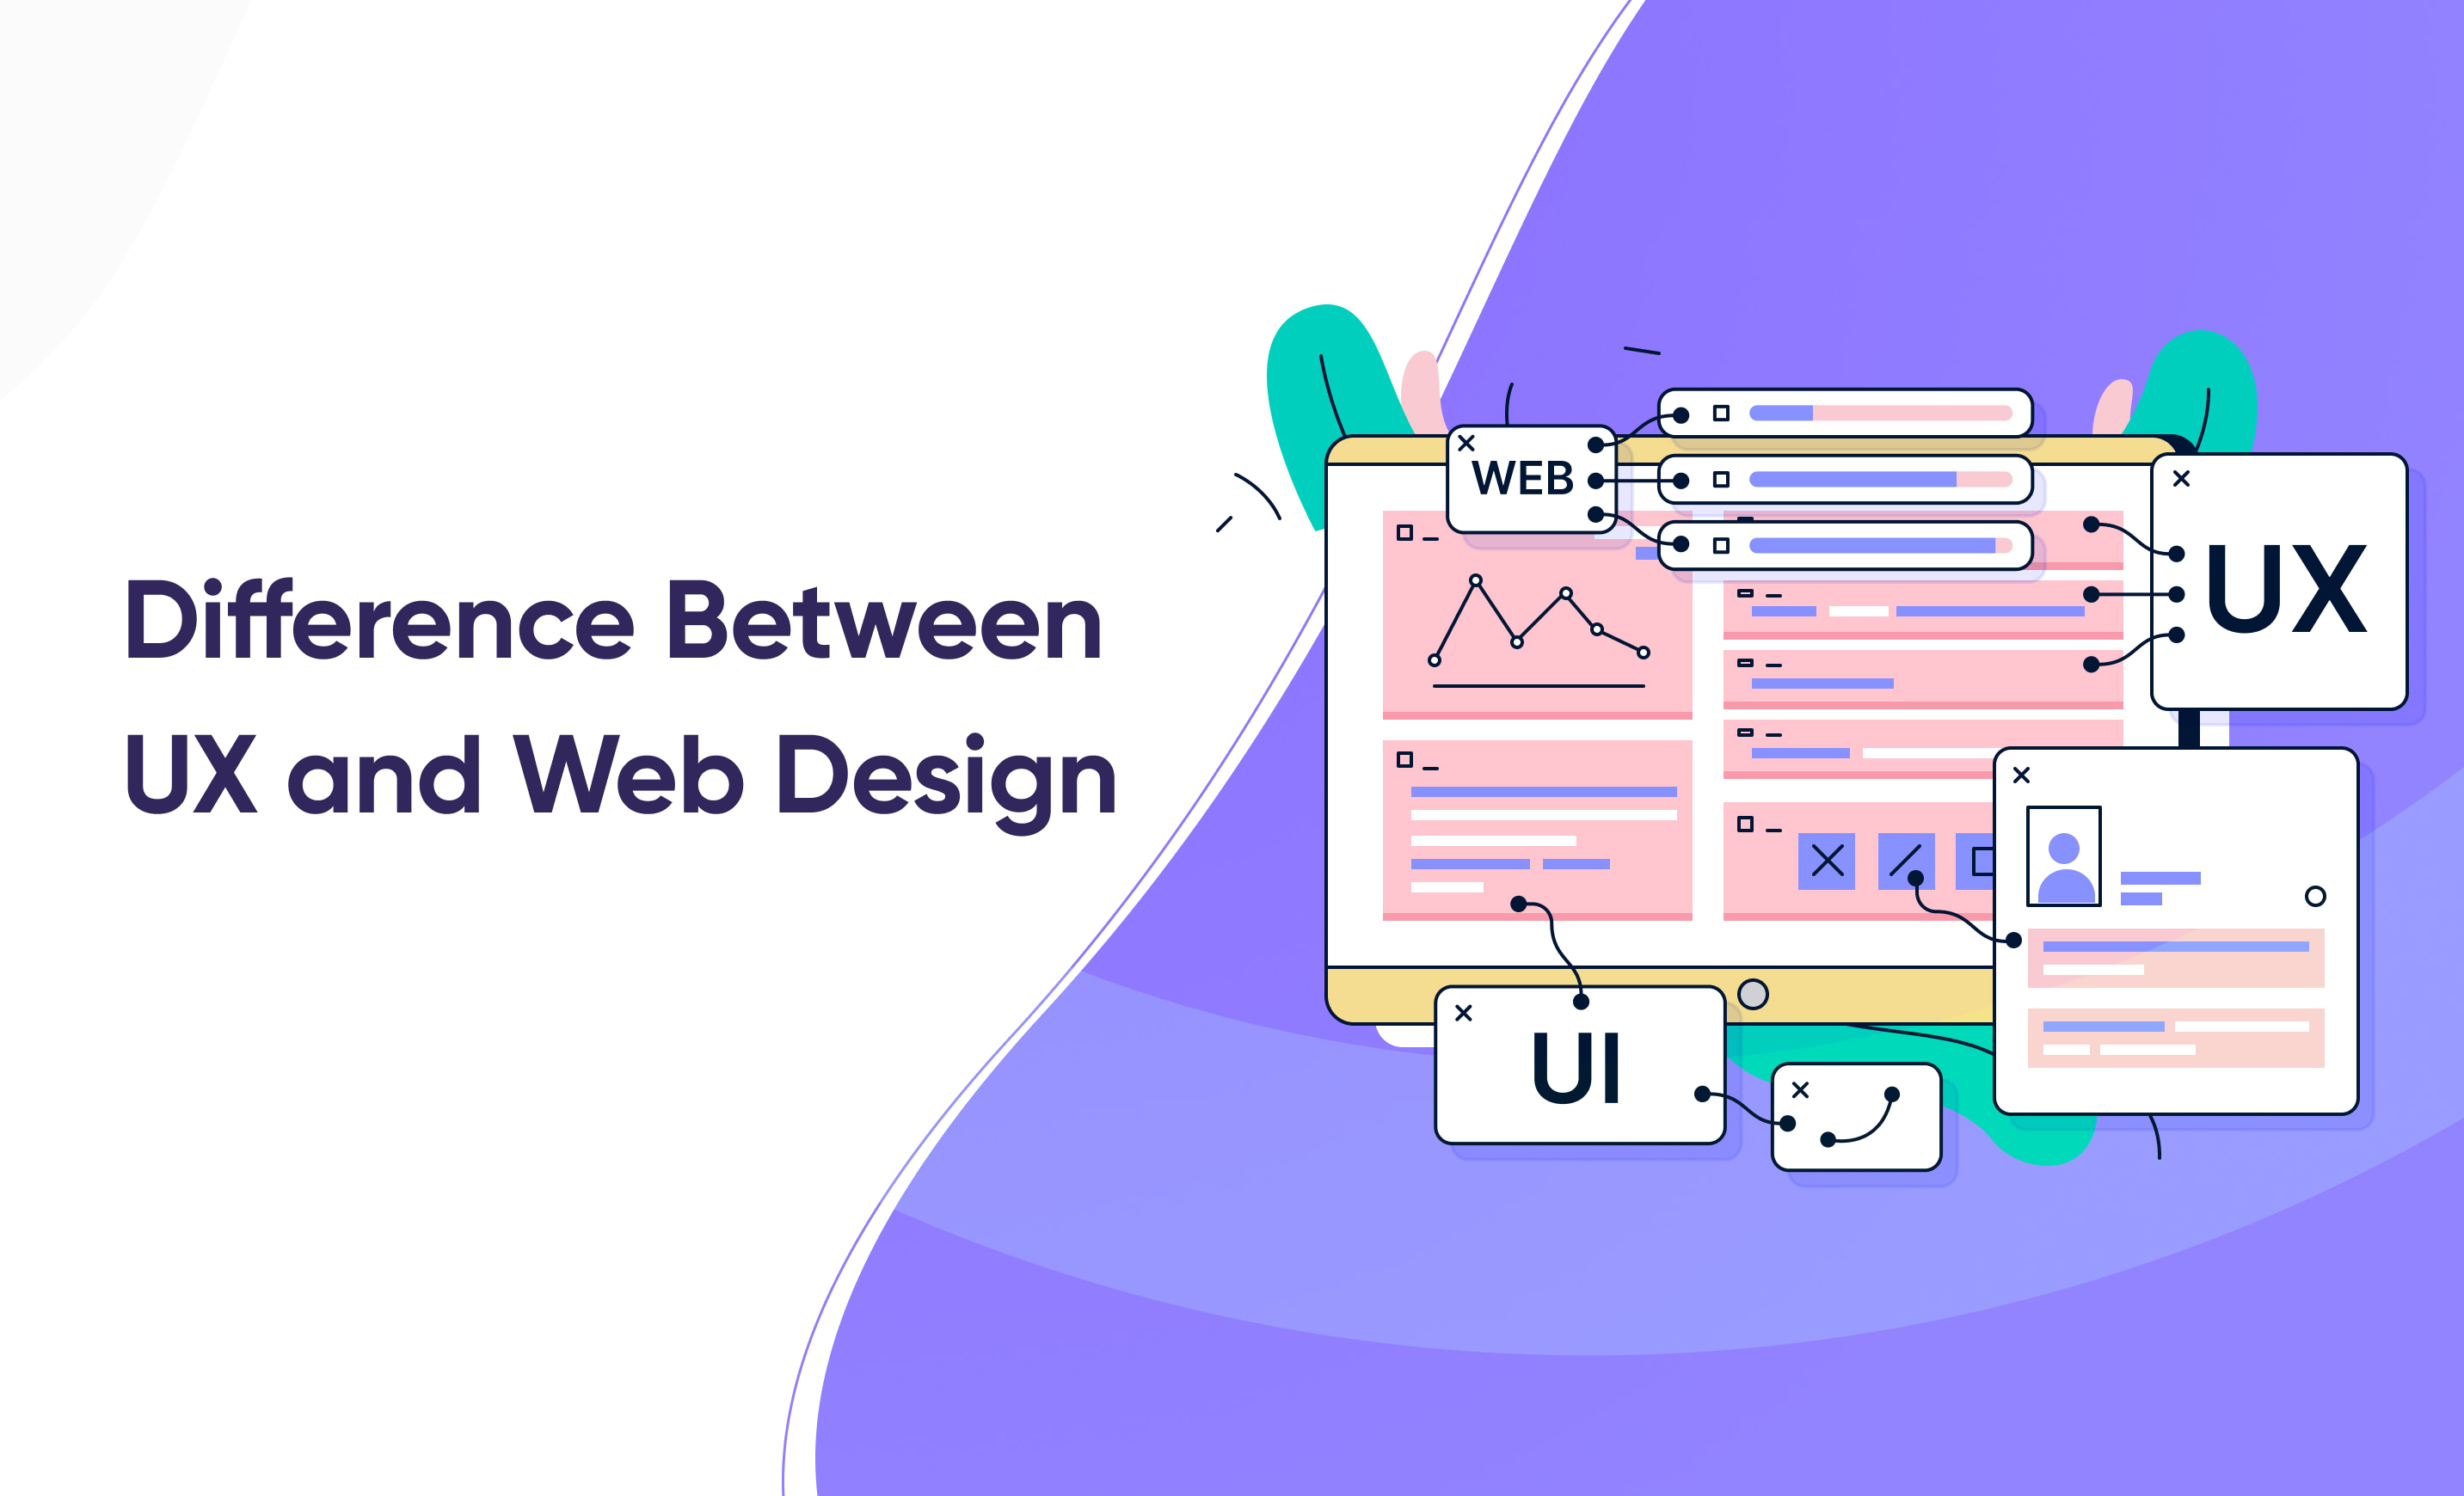 Difference Between UX and Web Design